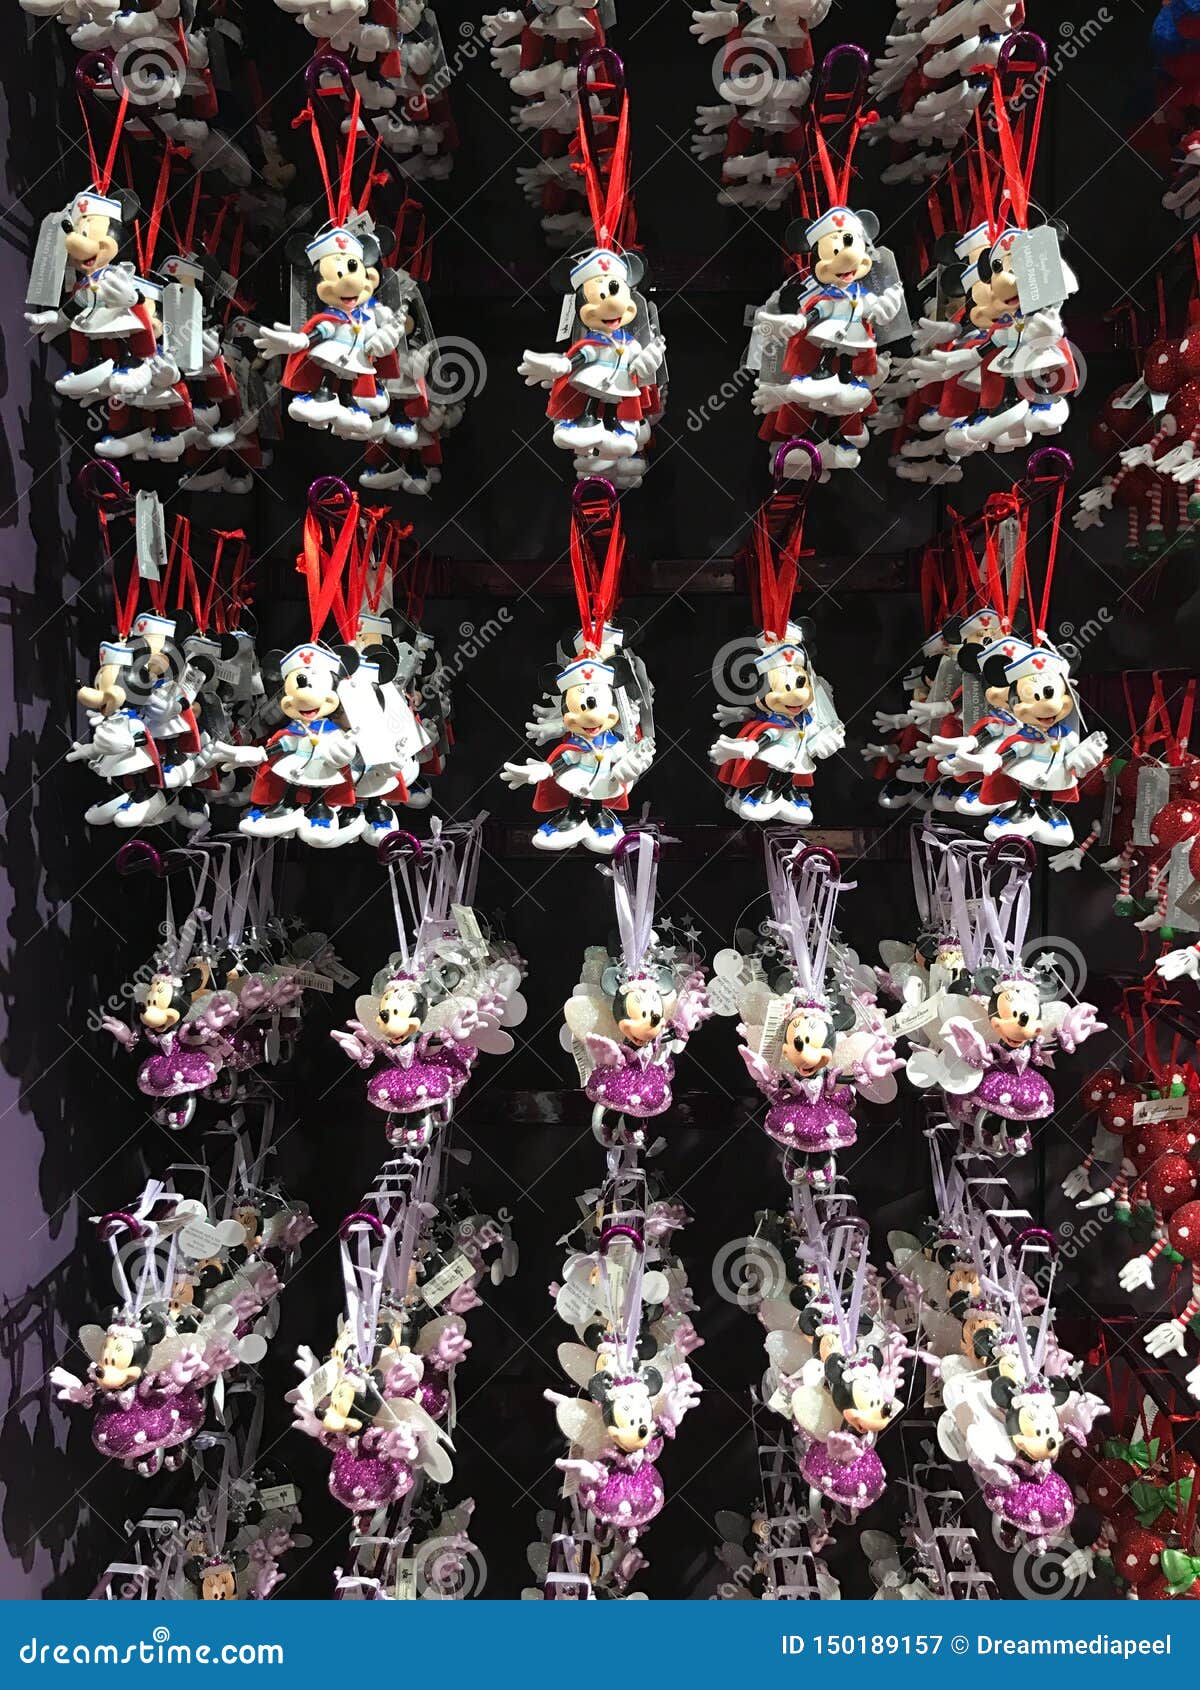 Minnie Mouse Christmas Ornaments For Sale Editorial Photography